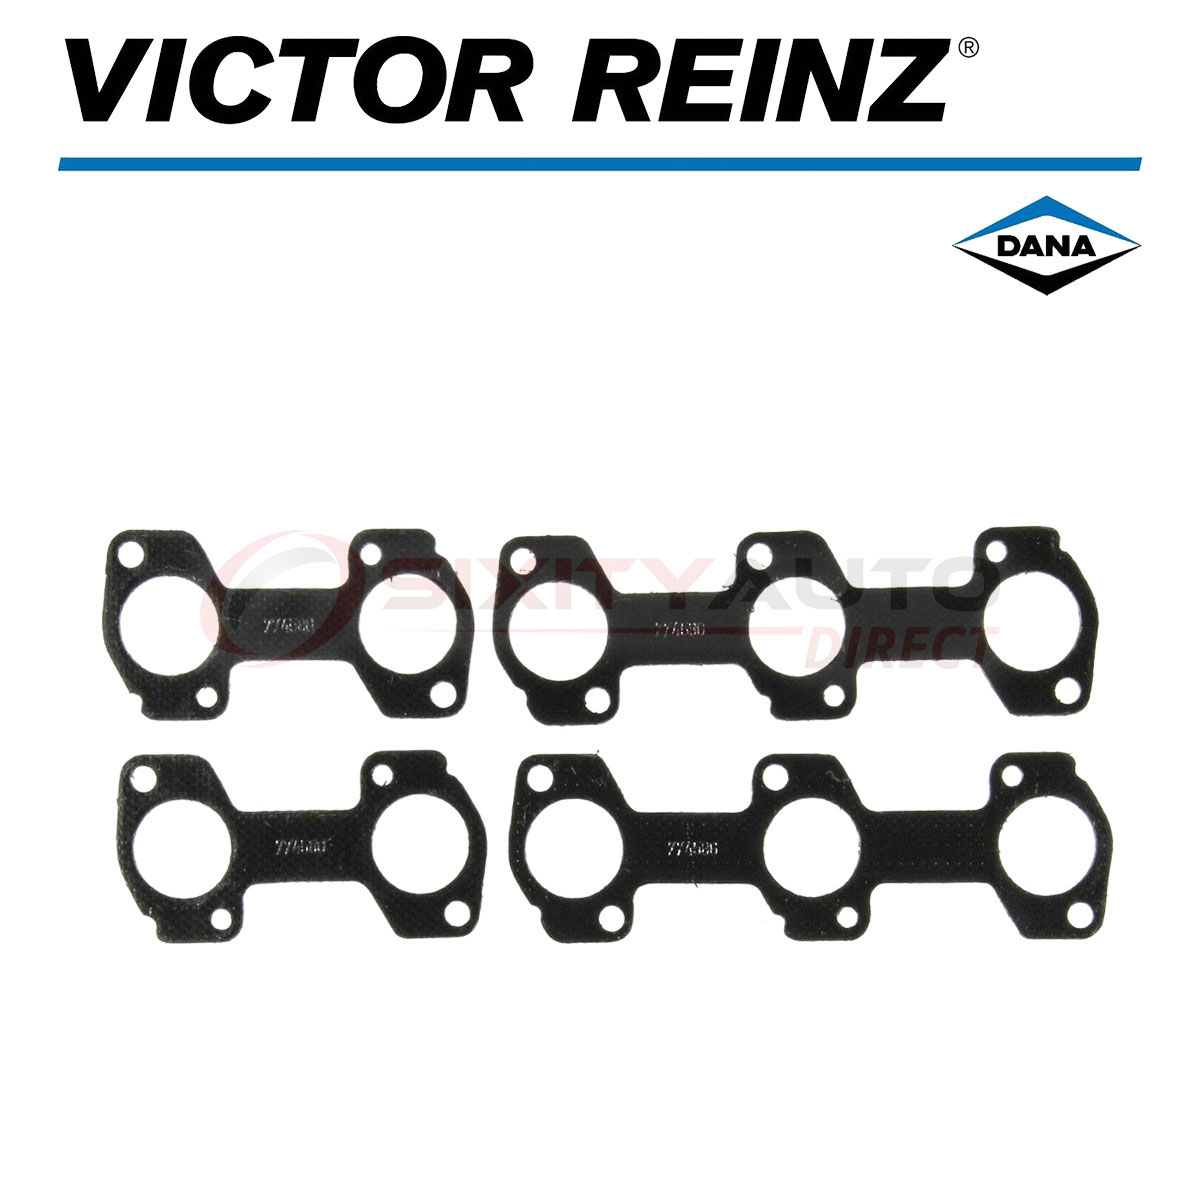 Victor Reinz Exhaust Manifold Gasket for 2000-2005 Ford Excursion 6.8L 2000 Ford Excursion V10 Head Gasket Replacement